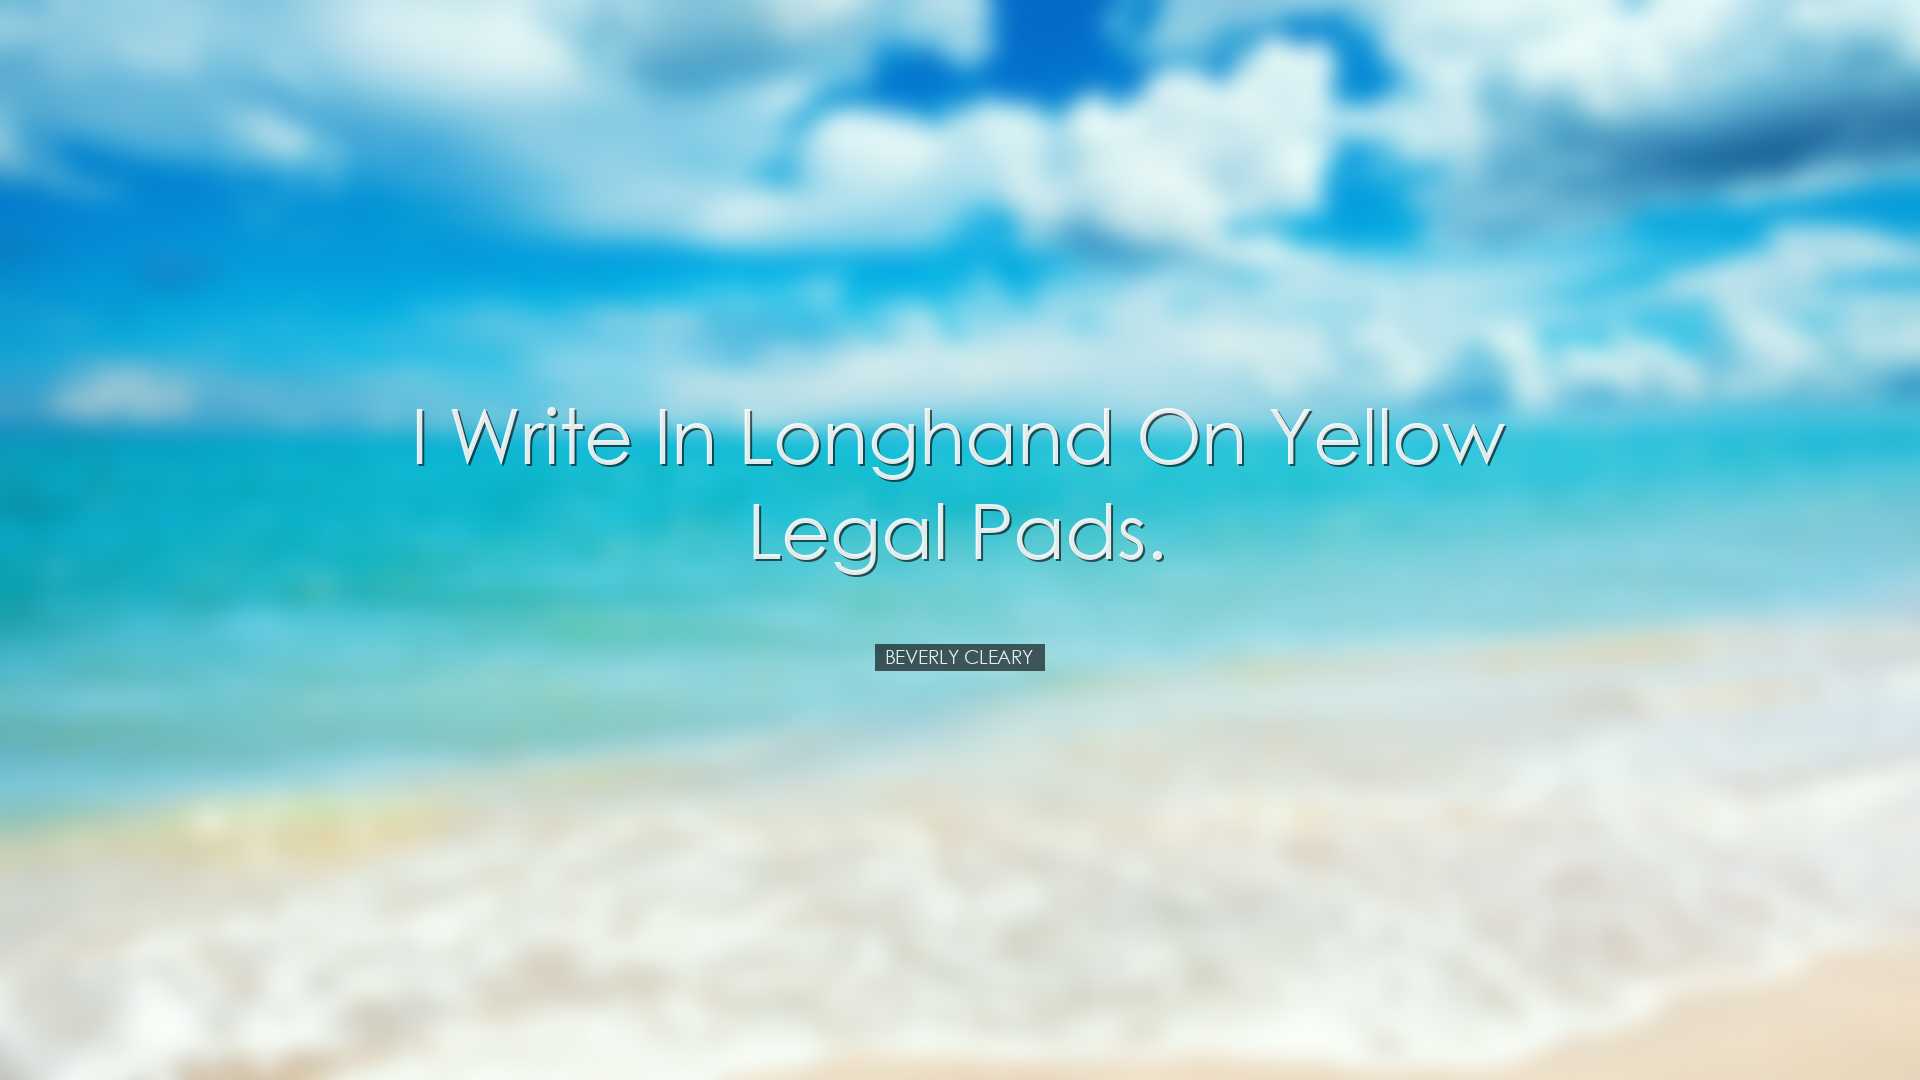 I write in longhand on yellow legal pads. - Beverly Cleary